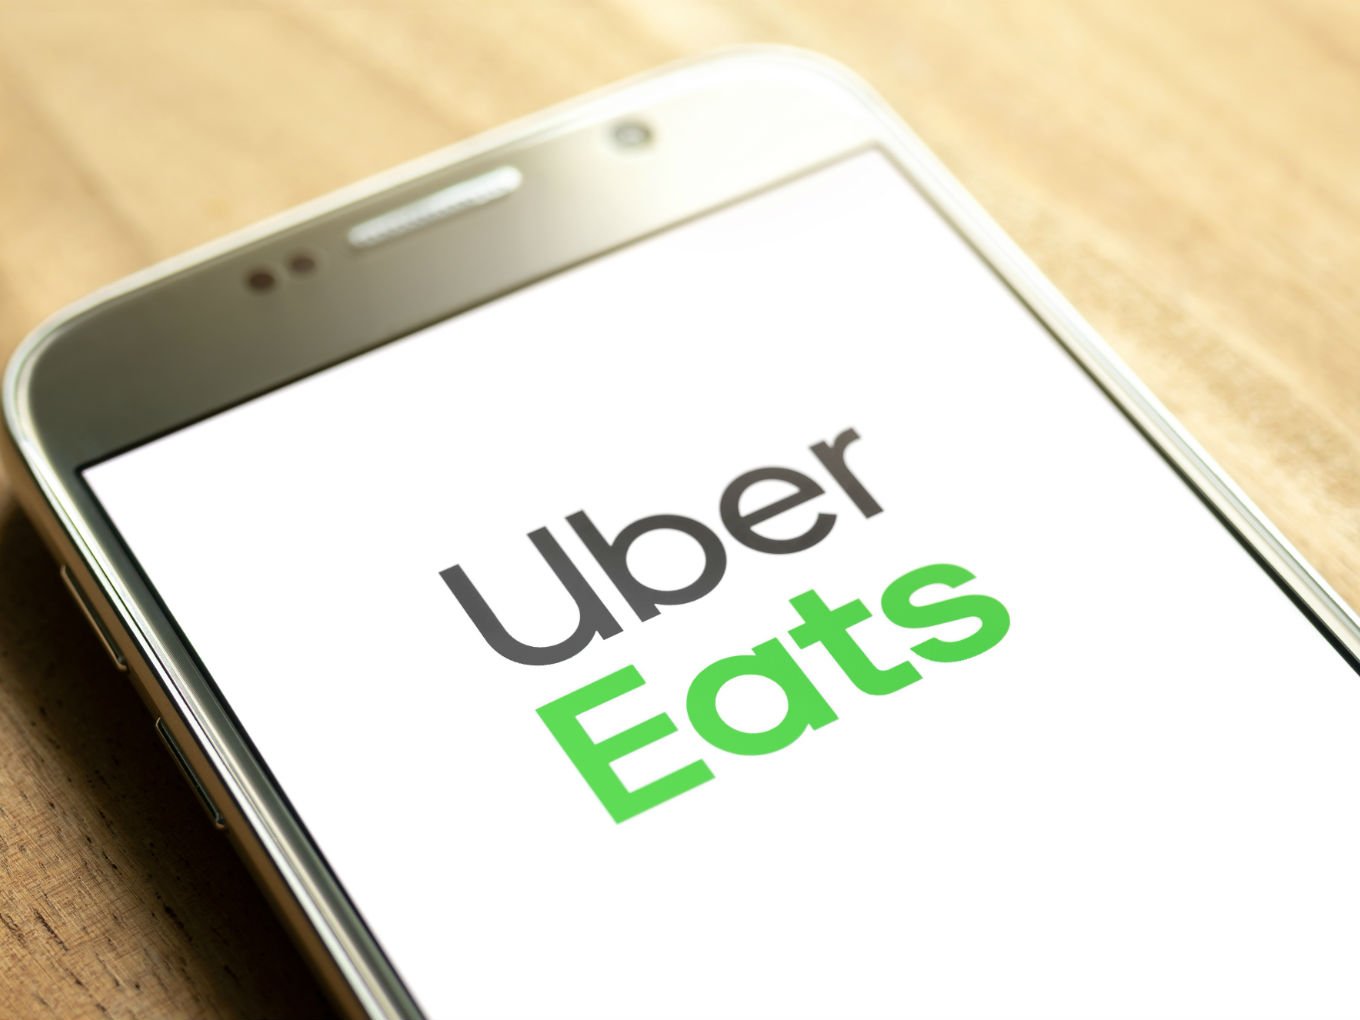 Why UberEats Is Lagging Behind Zomato?